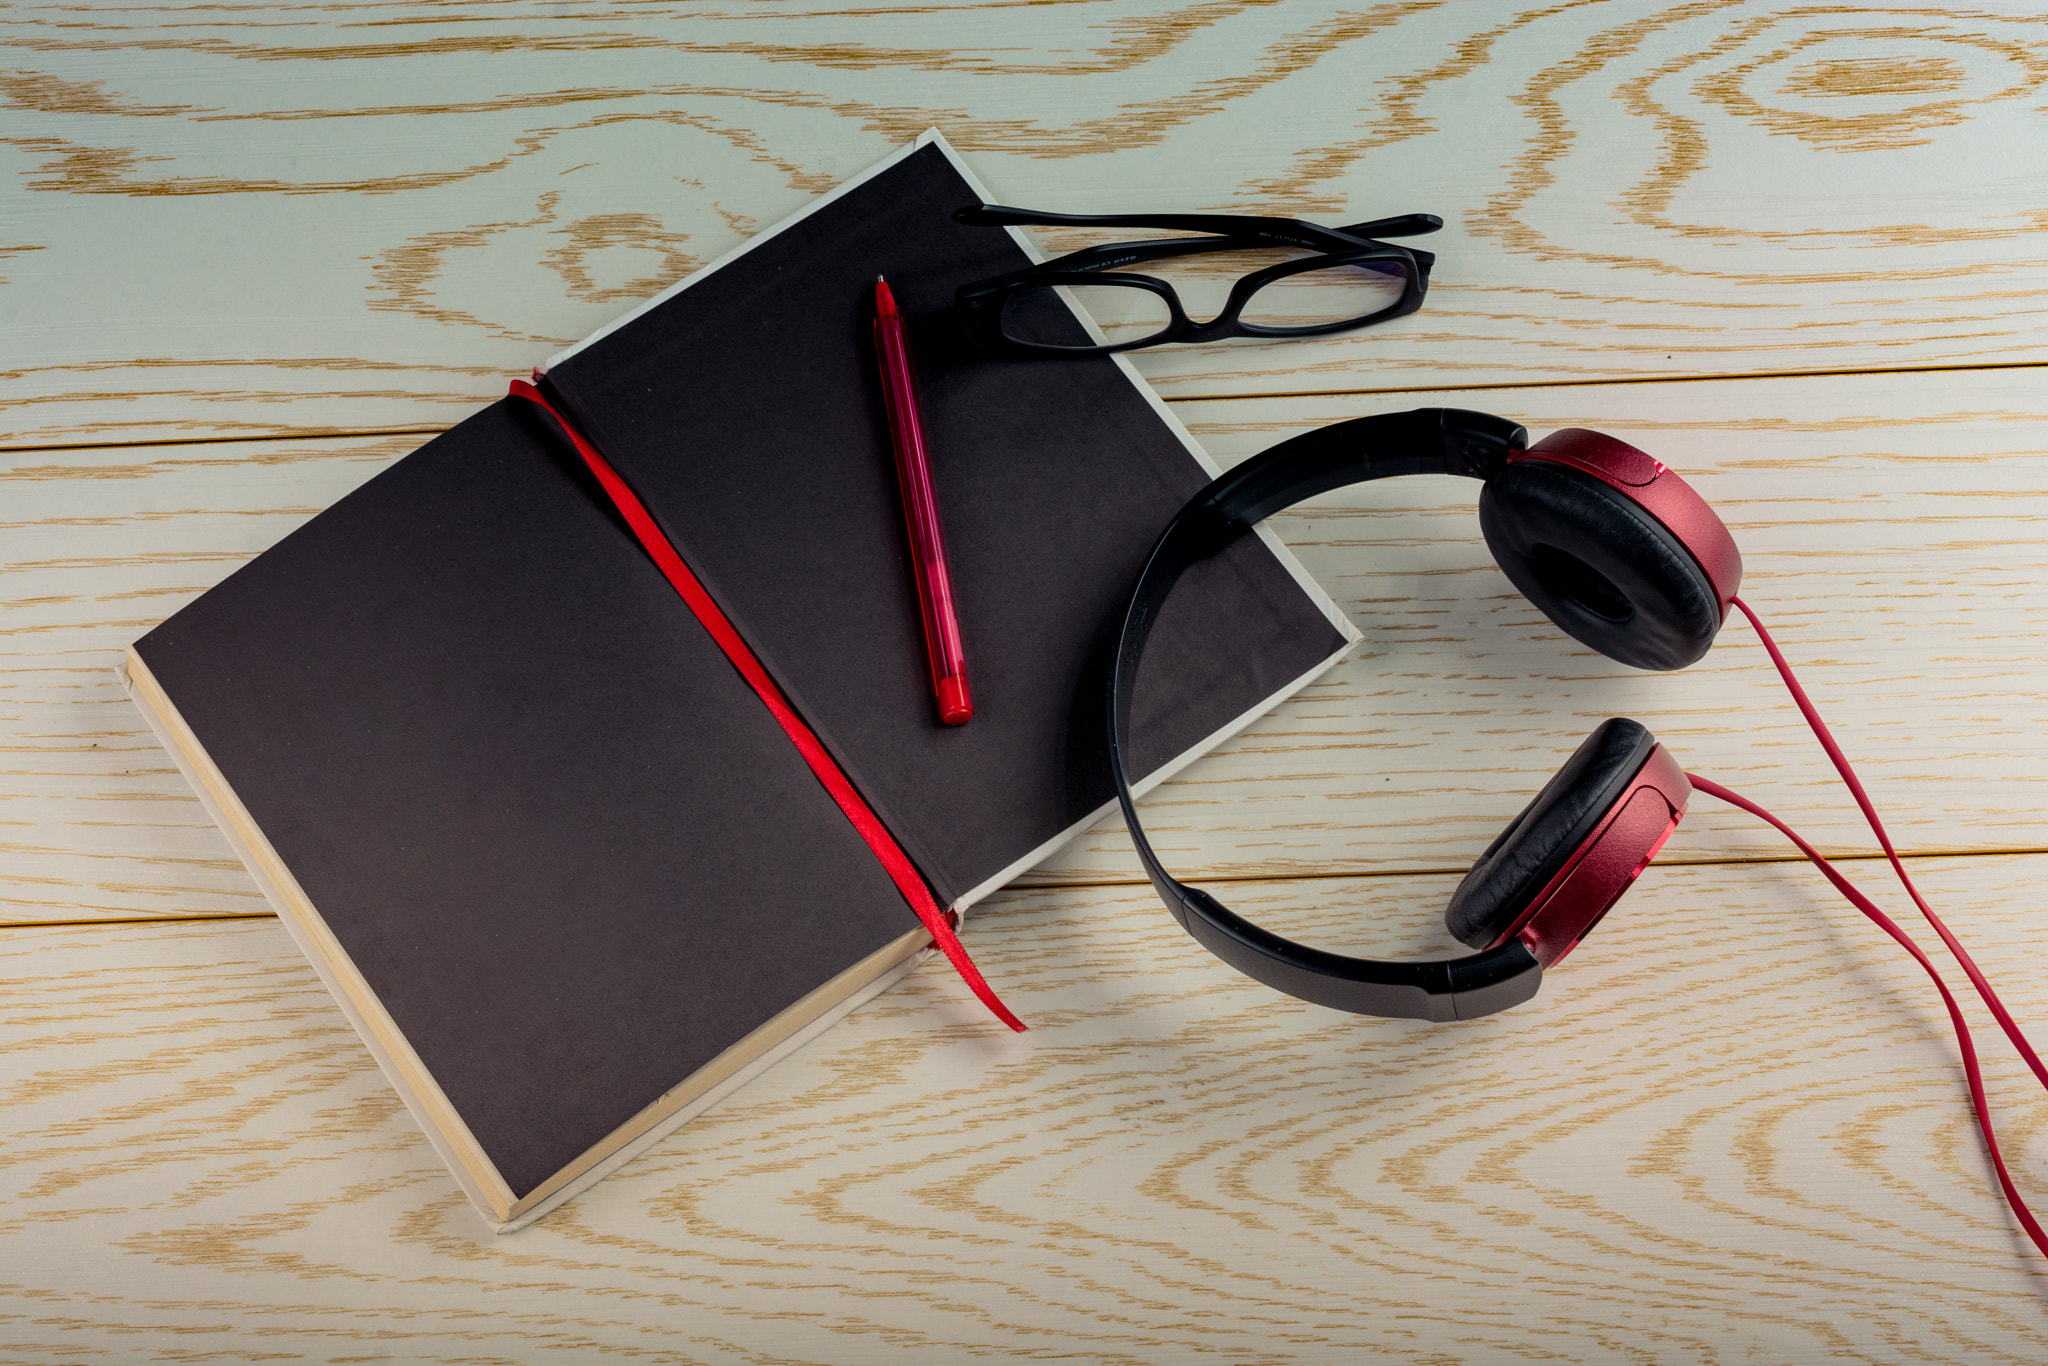 Headphones, notebook, pen and glasses on wooden background